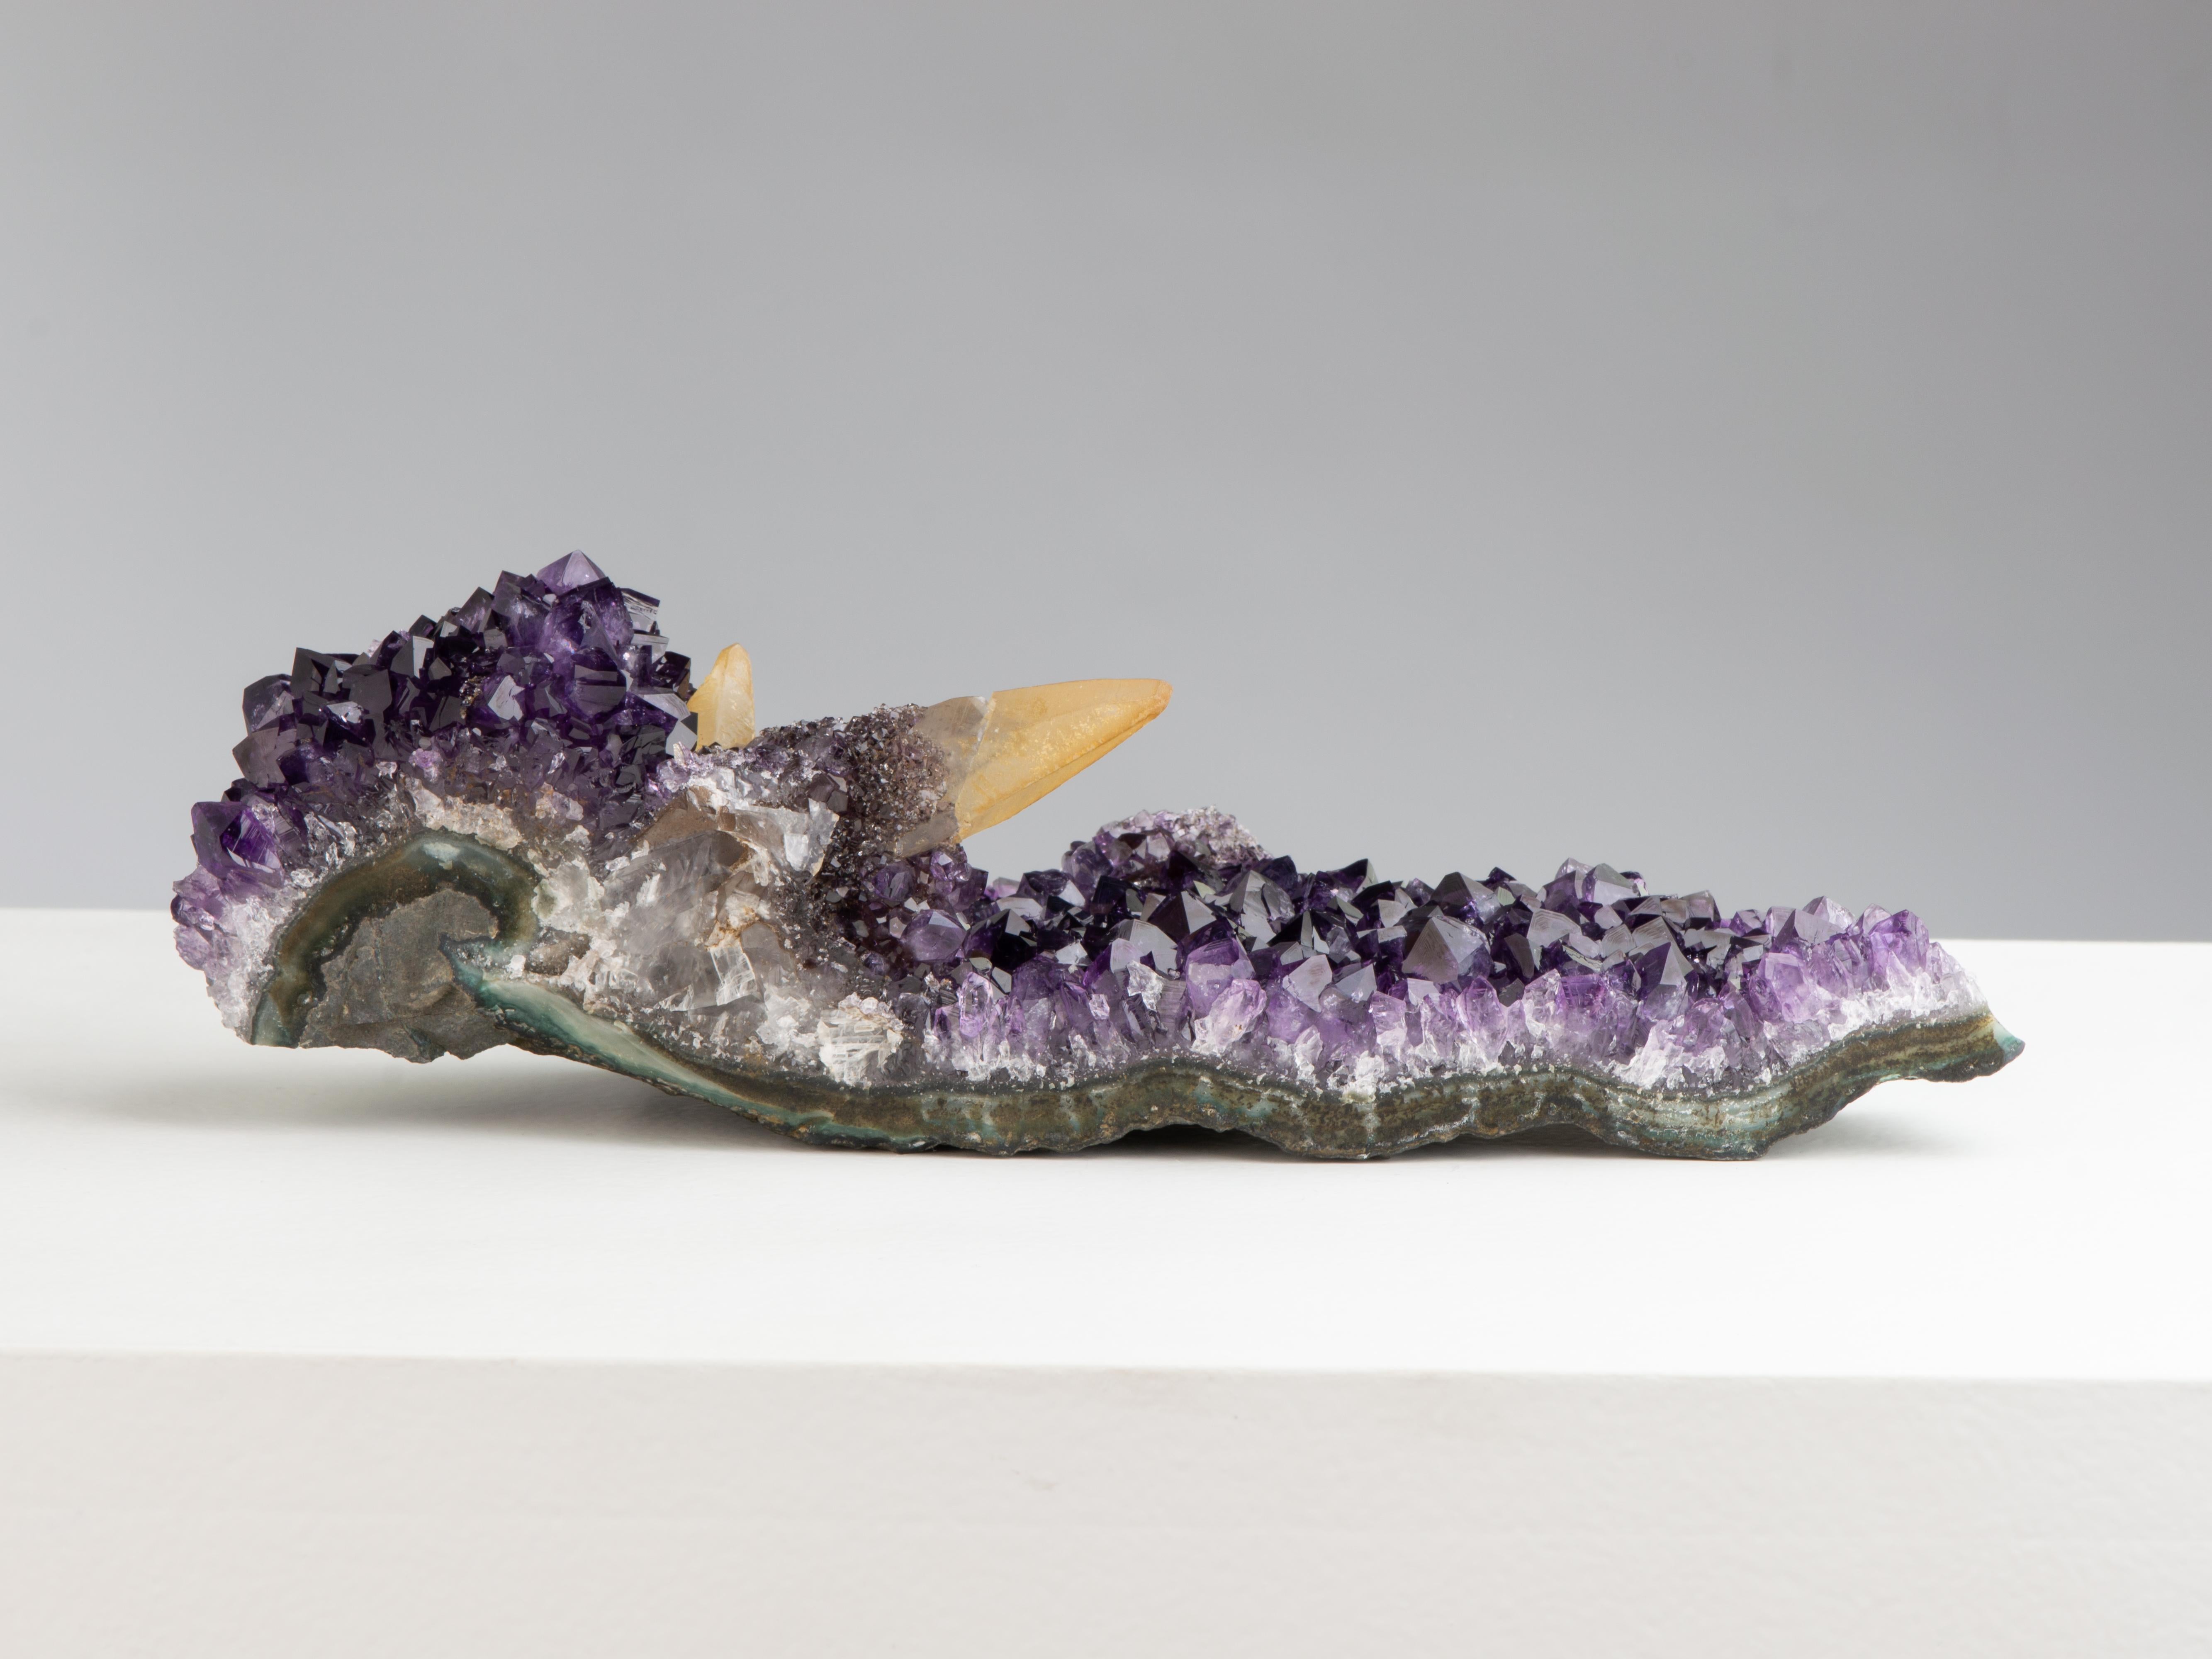 A very rare and exquisite table-top amethyst formation. The long formation preserves prominent golden calcites crystal on a bed of deep purple amethyst and is particularly sculptural. The calcites are covered in rare goethite and white quartz,